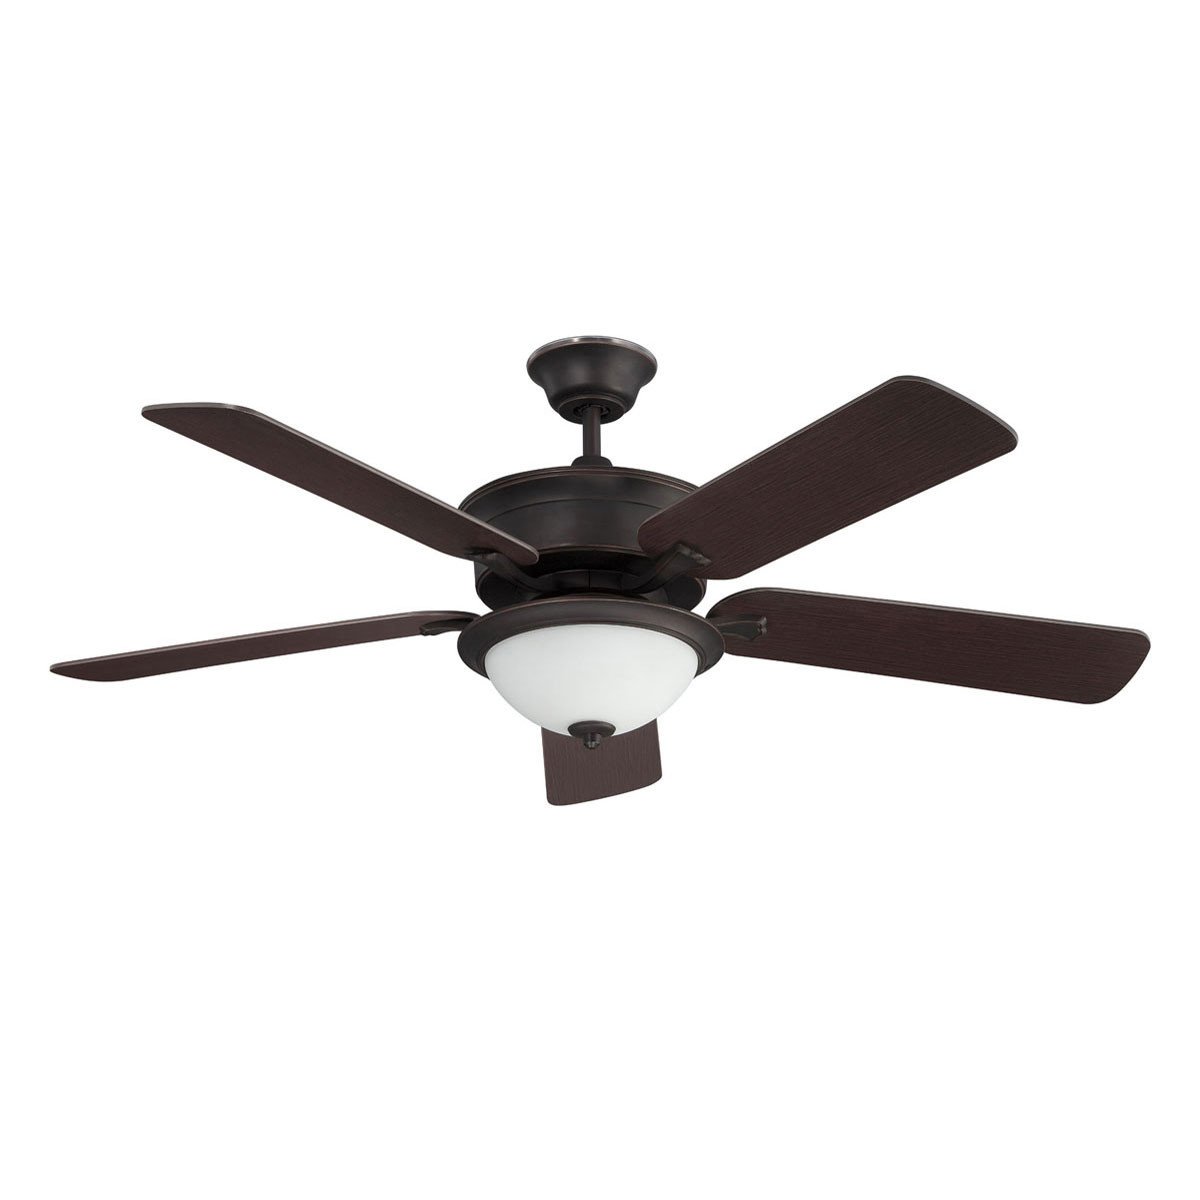 Concord Fans 52" Oil Rubbed Bronze Modern Ceiling Fan with Bowl Light Kit